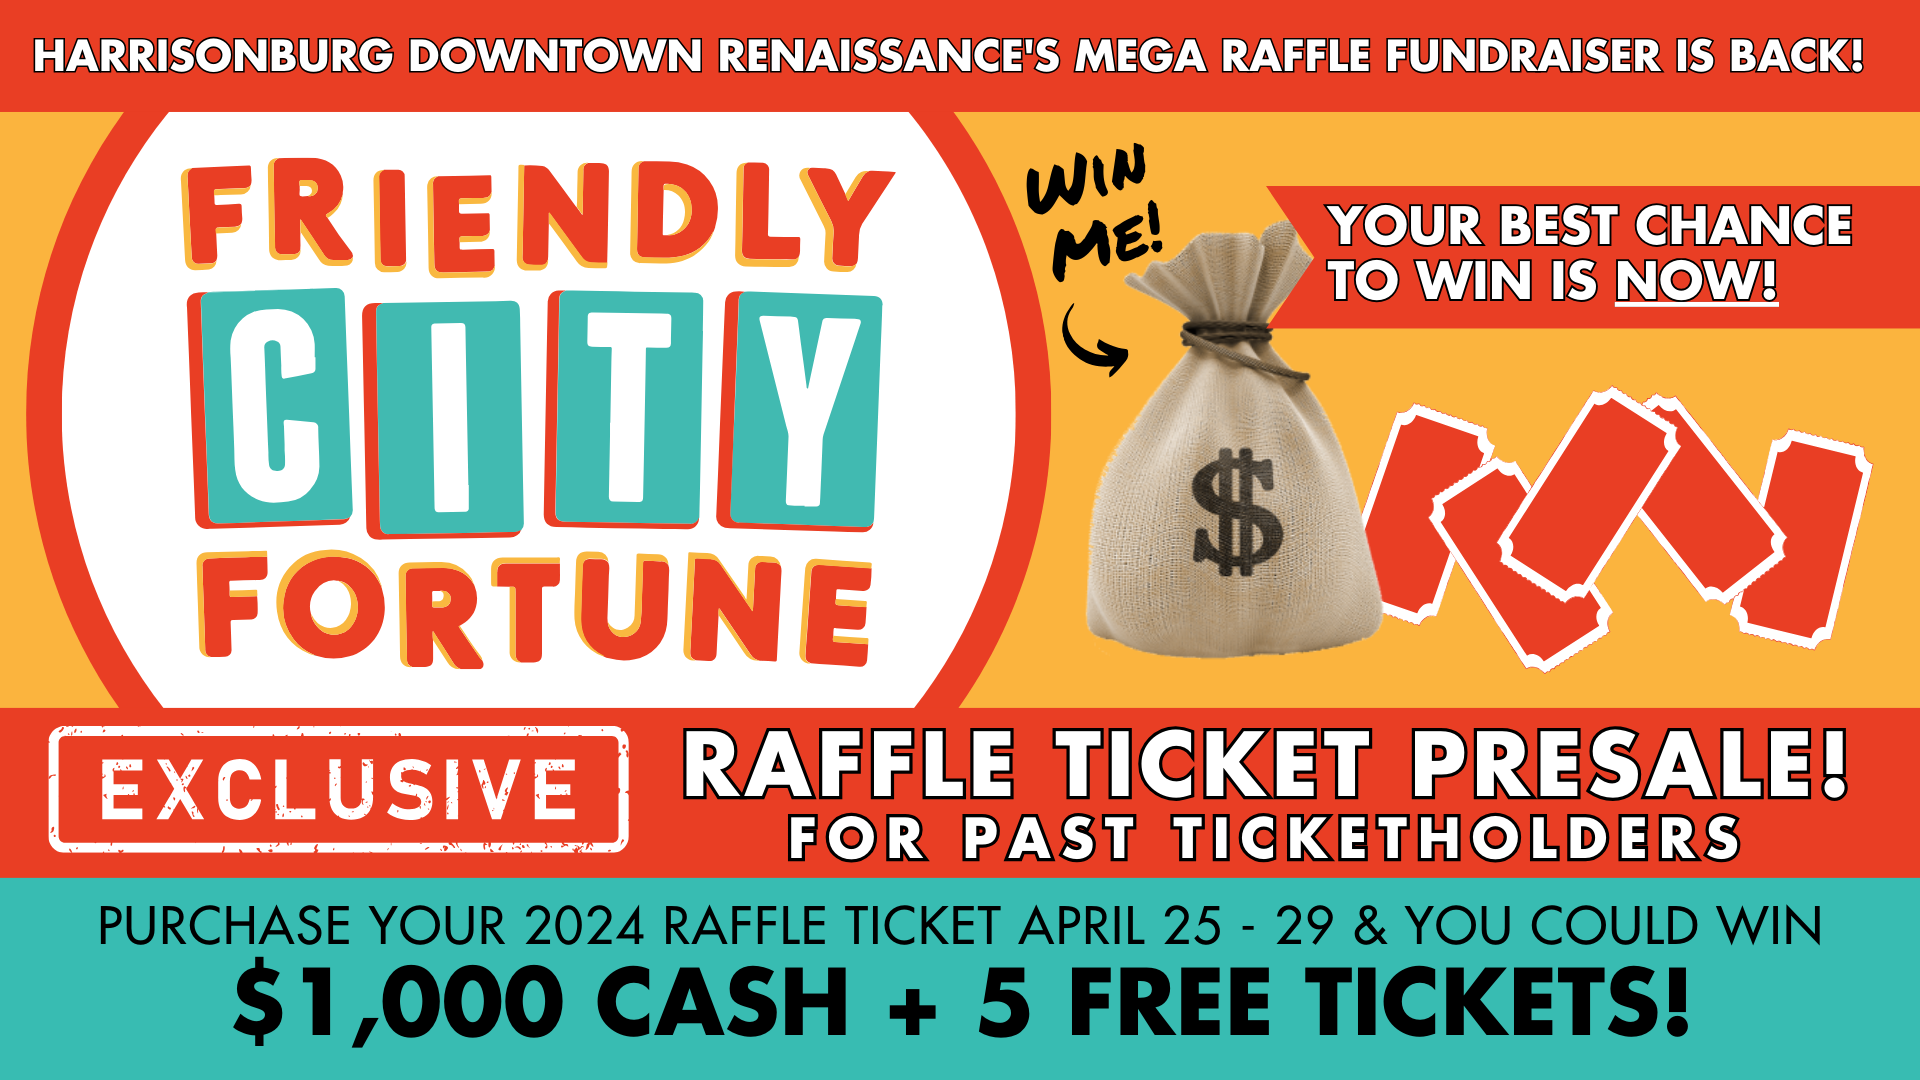 Friendly City Fortune Online presale for past ticket buyers. April 25 - 29. Win $1,000 Cash and five free raffle tickets.